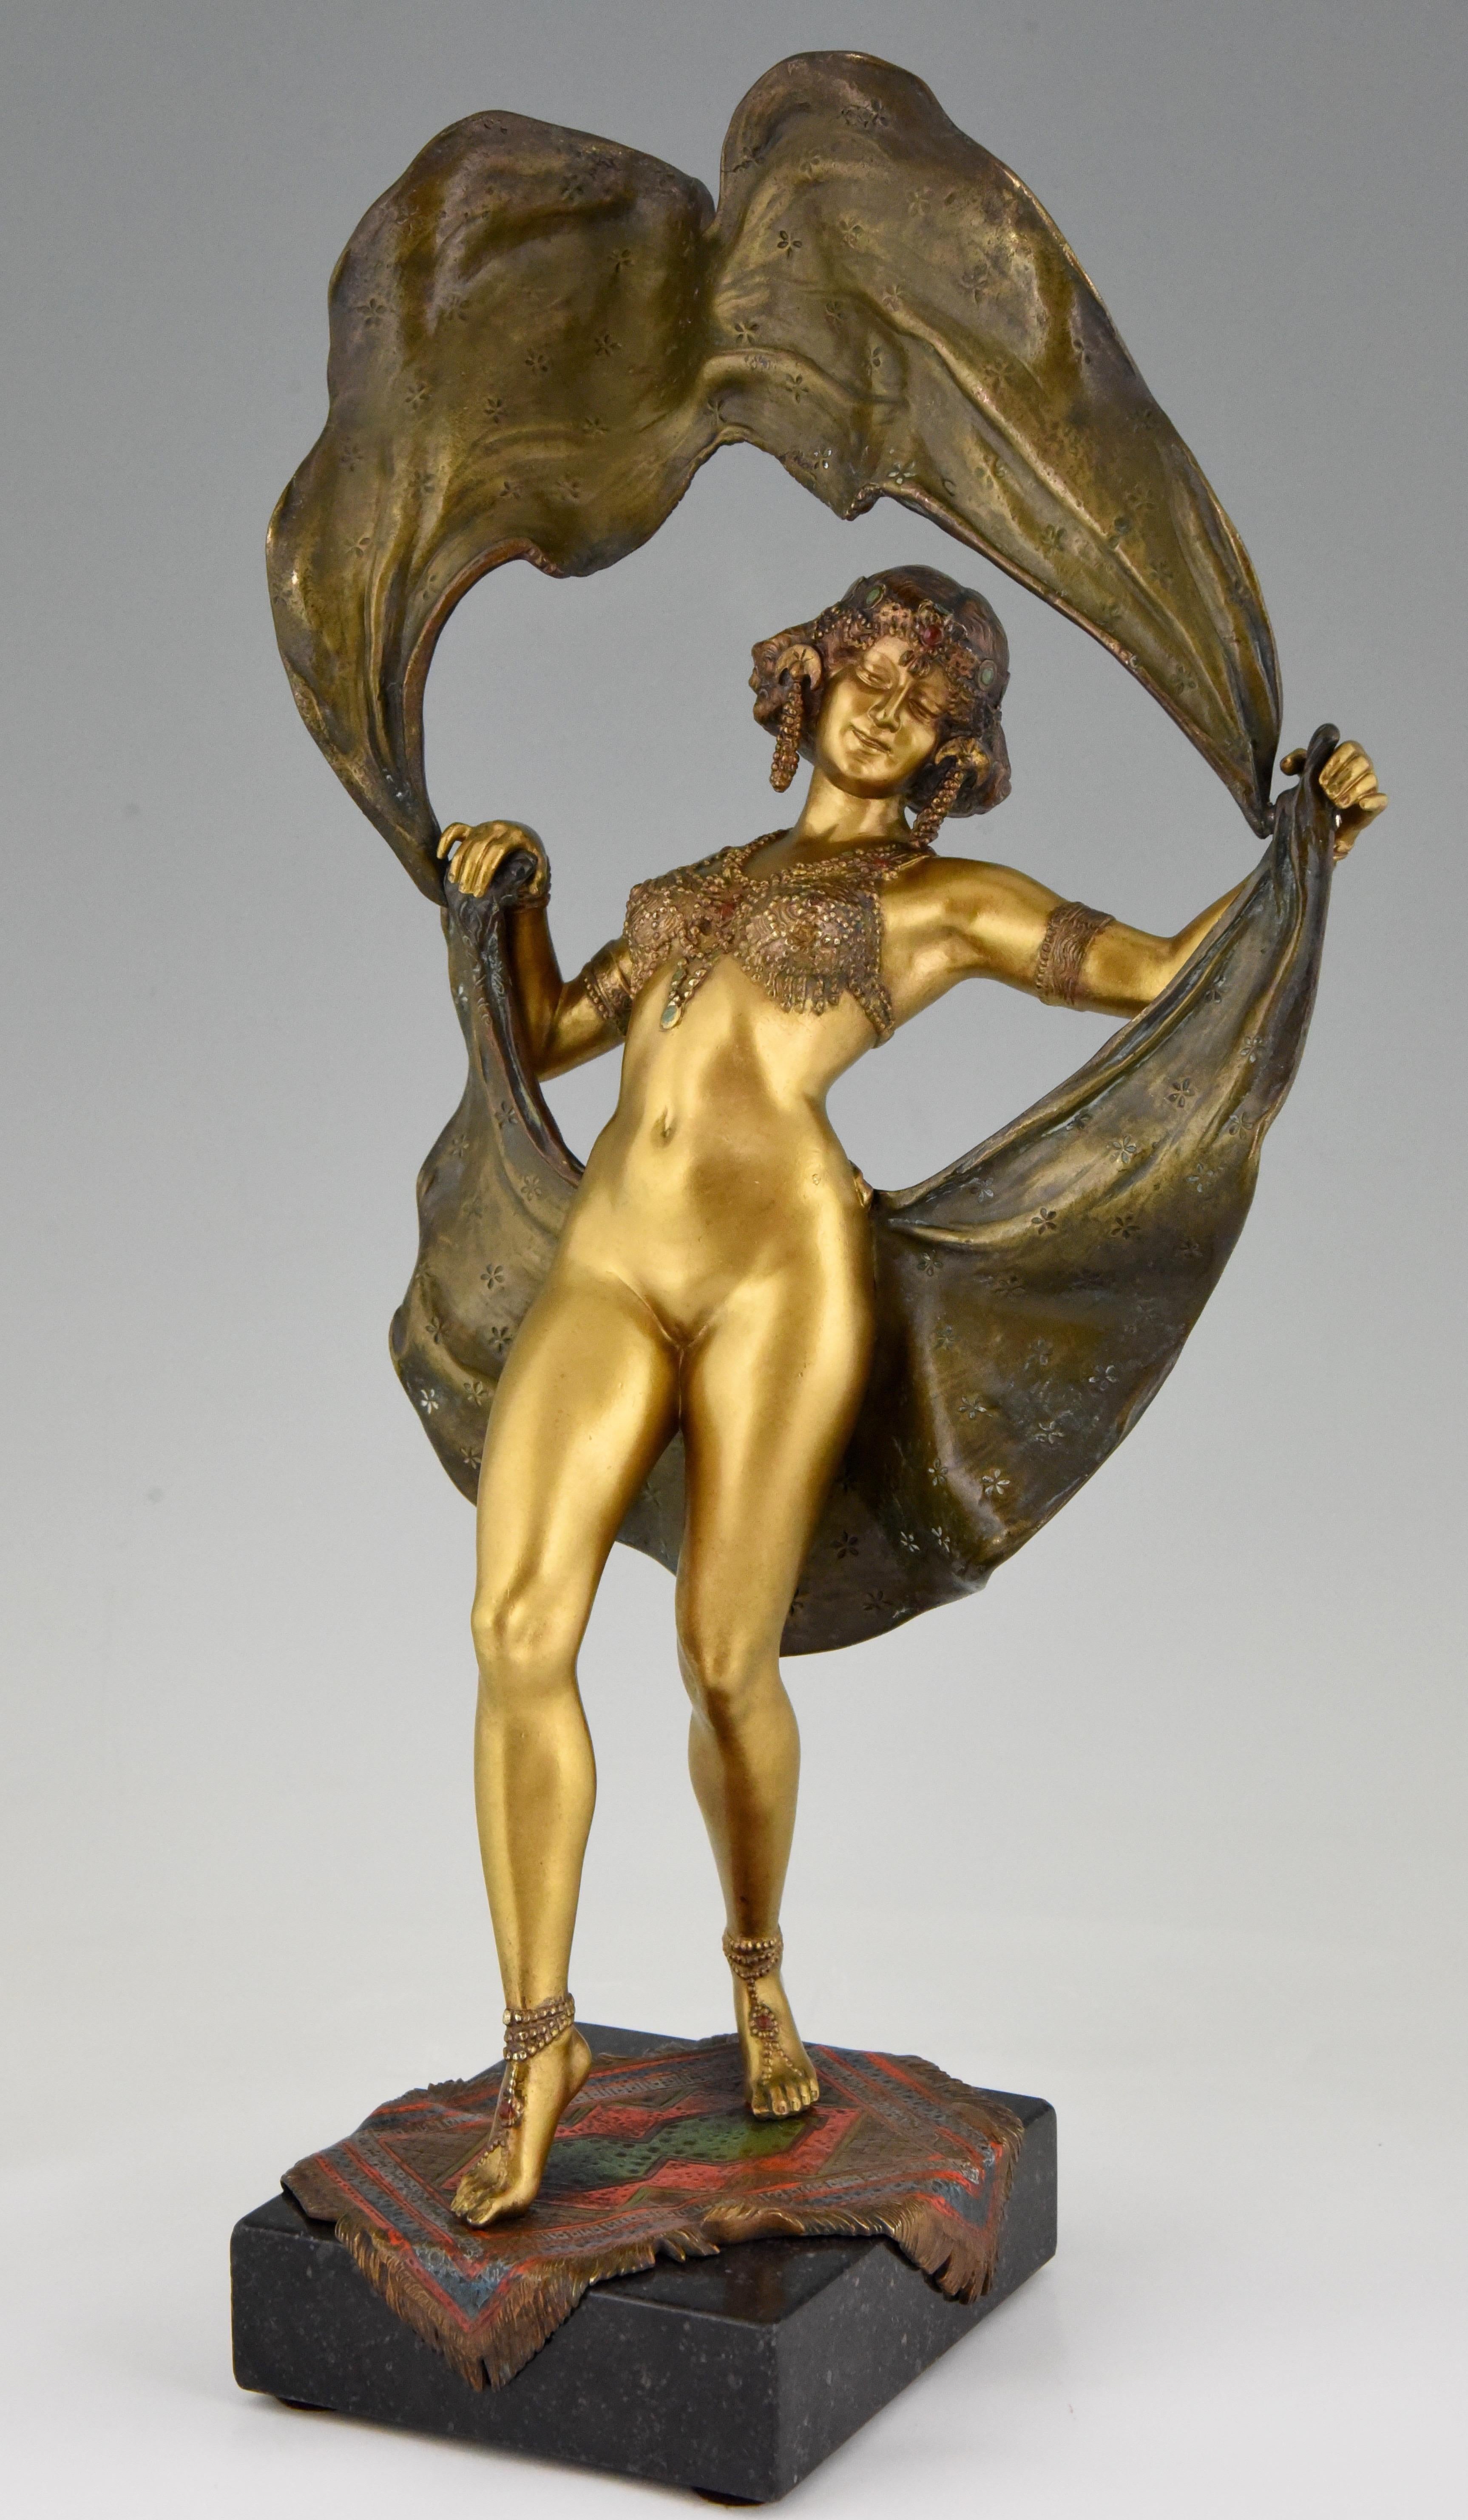 Big windy day, large erotic cold painted mechanical Vienna bronze of an oriental nude dancer. Her skirt lifts to reveal her naked body. 
Signed ‘Nam Greb’ and ‘B’ in a vase.
Cold patined bronze on marble base, Austria, 1910.

This model is